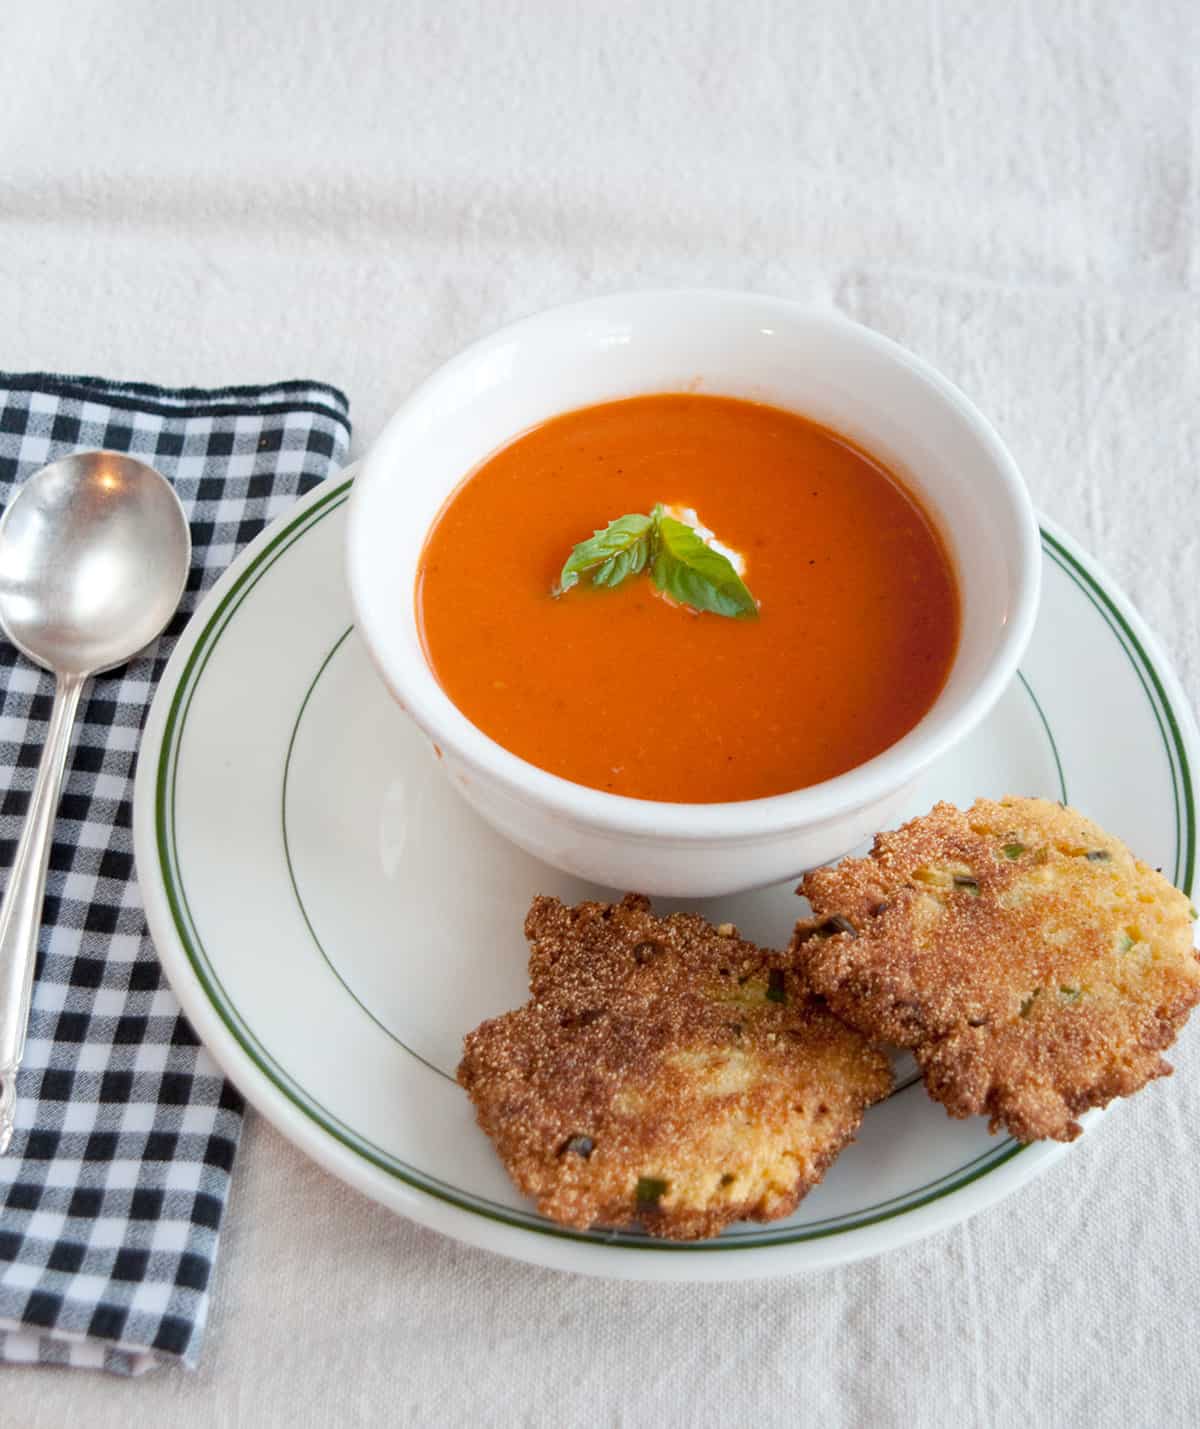 A bowl of tomato soup with cornmeal fritters on the side.